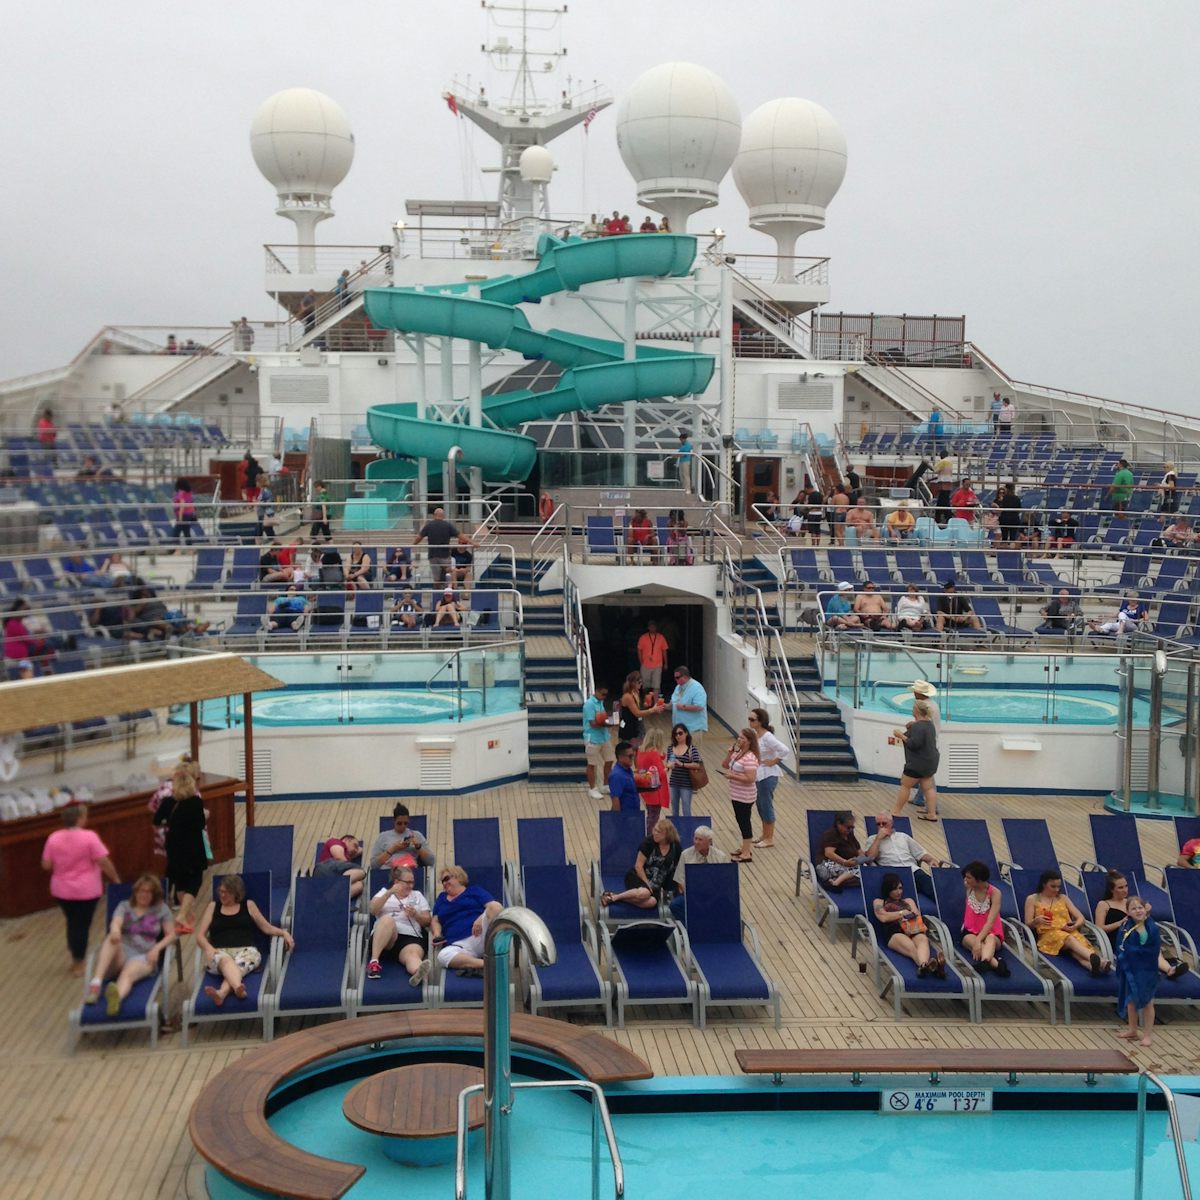 out on the Lido Deck